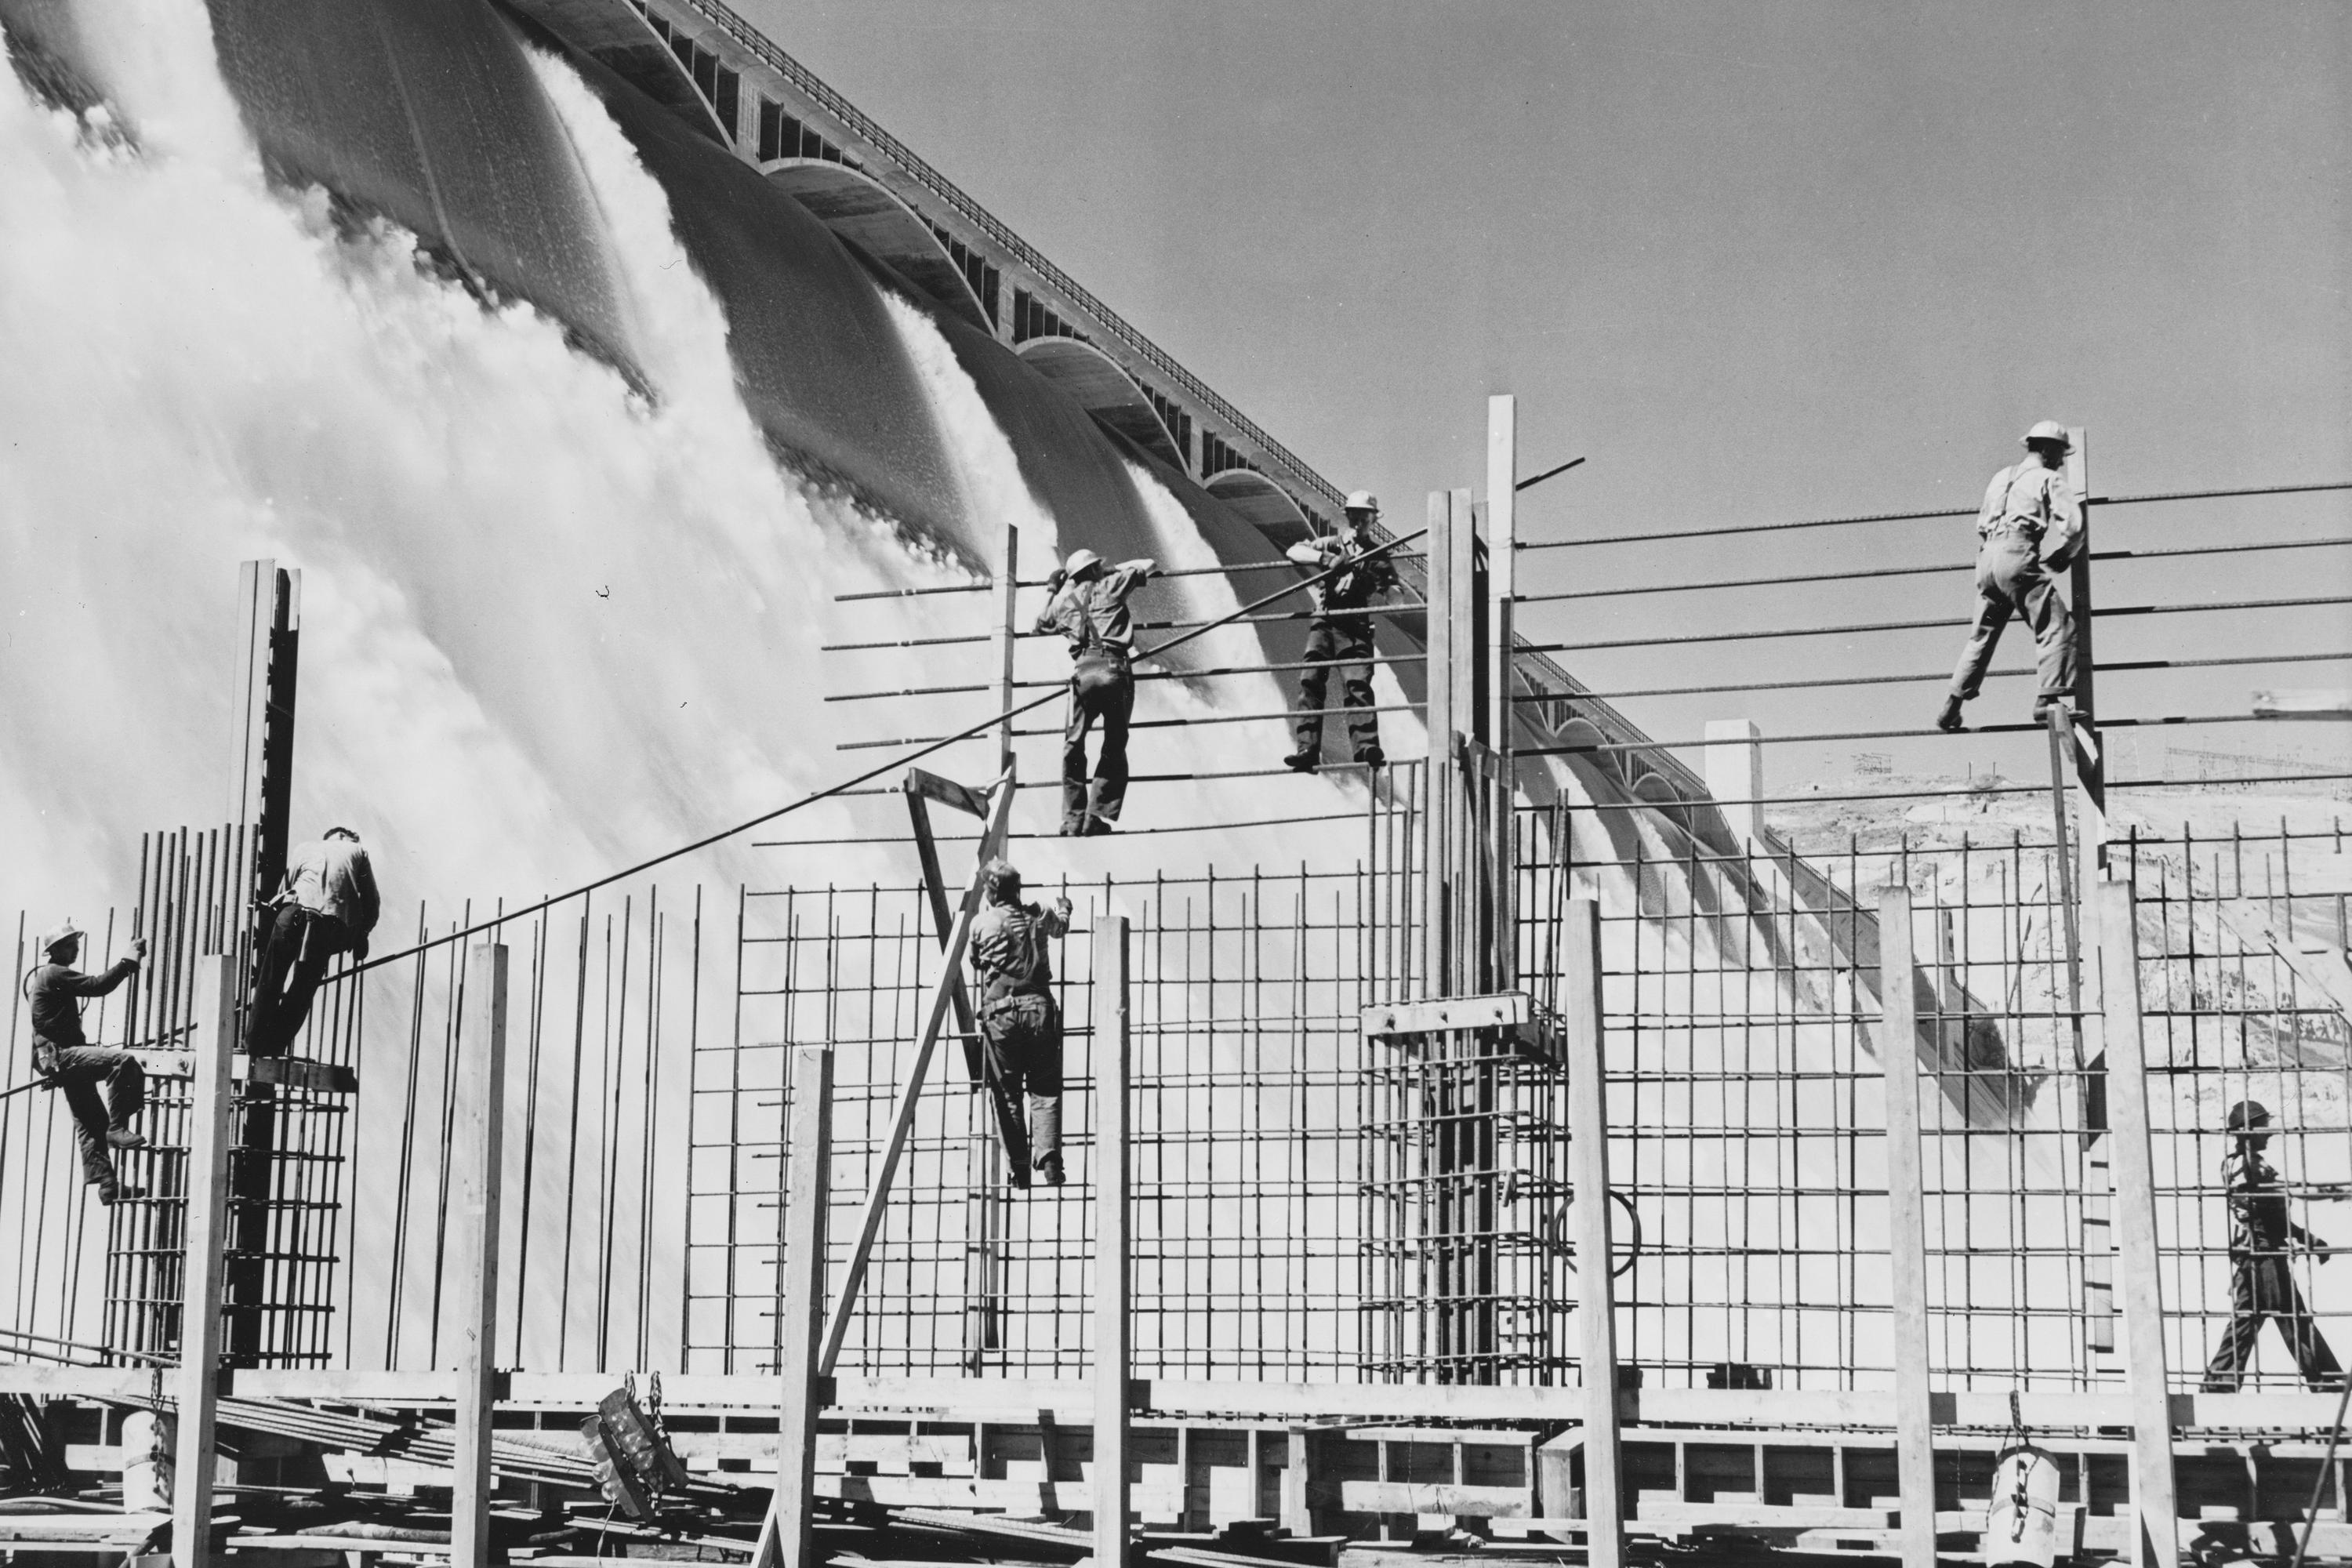 seven men constructing scaffolding with a massive gushing dam behind them